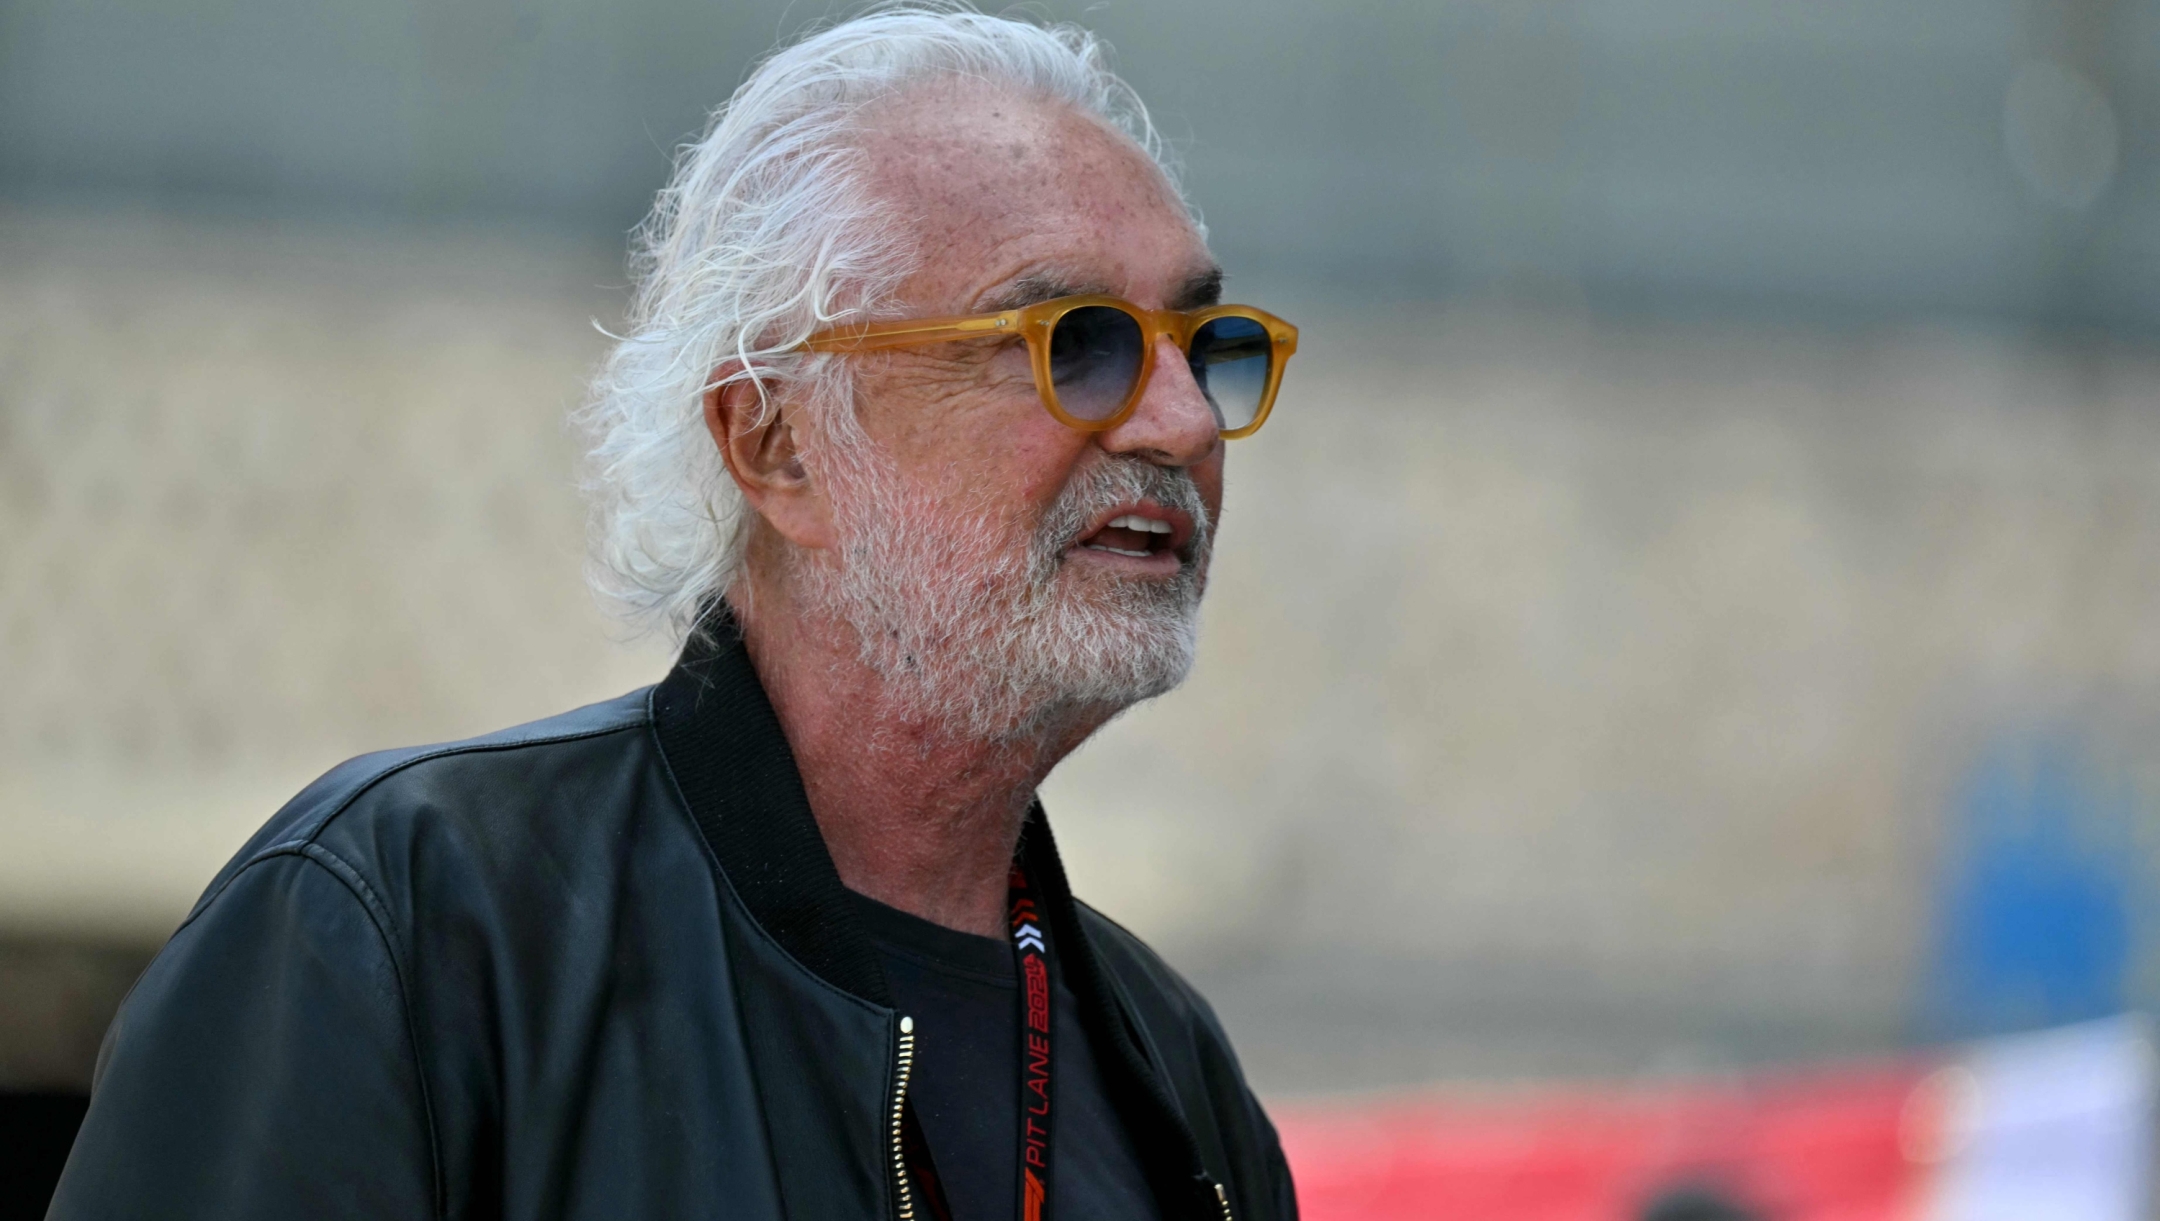 (FILES) Driver manager Flavio Briatore walks in the pit lane of the Circuit de Monaco ahead of the Formula One Monaco Grand Prix on May 26, 2024. Italian Flavio Briatore, former boss of the Benetton and Renault teams in the 1990s and 2000s, has been appointed "executive advisor" by Alpine, the Franco-British Formula 1 team said on June 21 in a press release. "Briatore will focus primarily on the team's high-level activities, including: the search for top talent and analysis of the driver market, challenging the existing project by evaluating the current structure and advising on certain strategic issues in the sport," Alpine details. (Photo by ANDREJ ISAKOVIC / AFP)